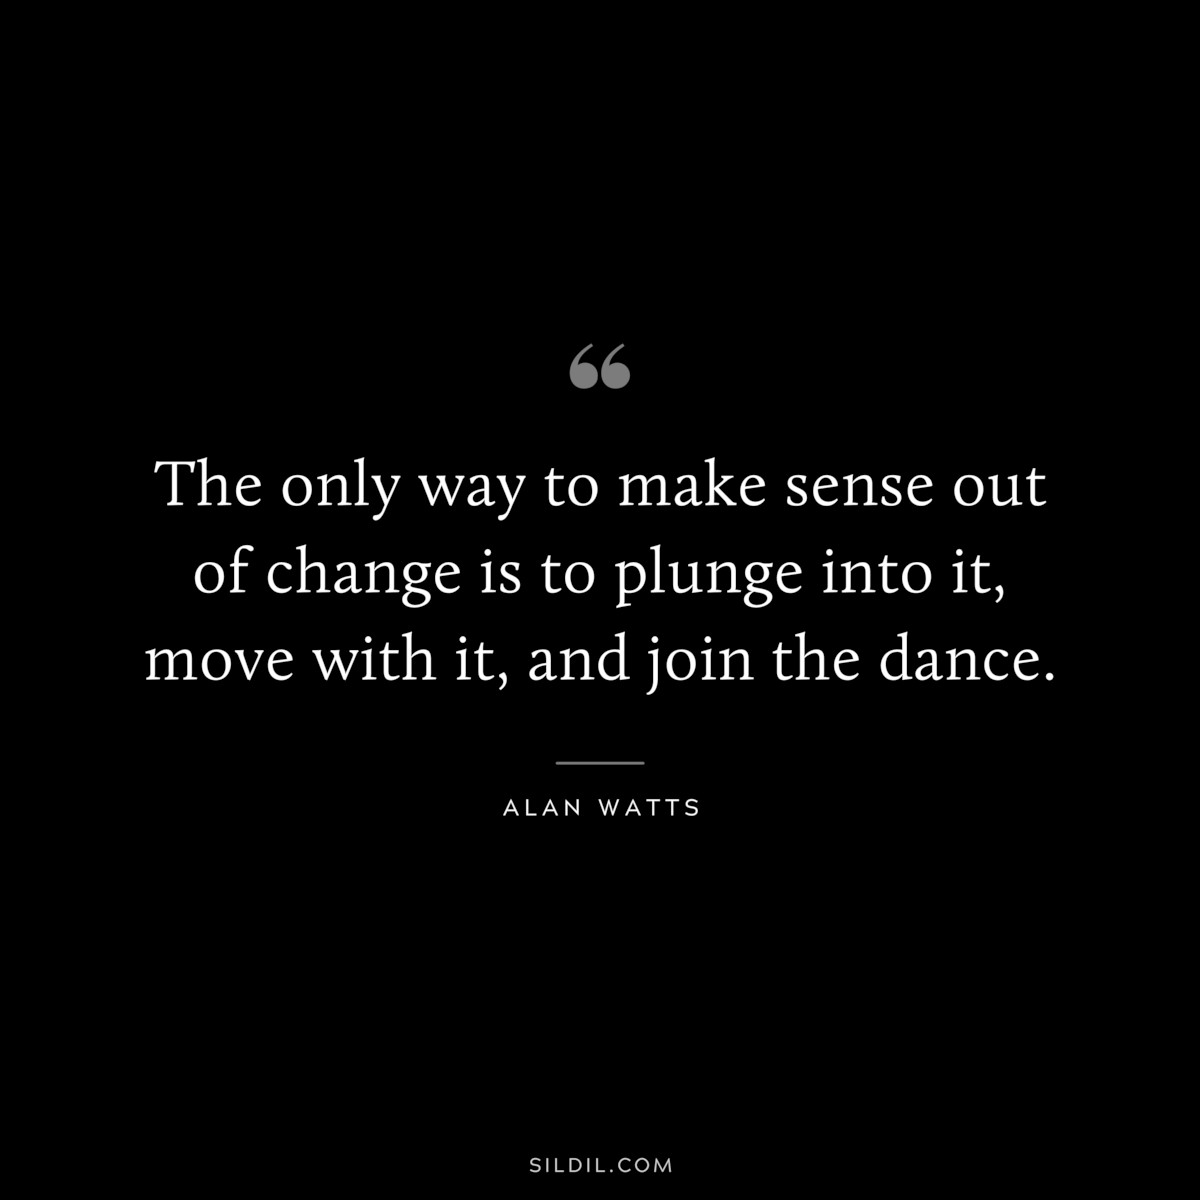 The only way to make sense out of change is to plunge into it, move with it, and join the dance. ― Alan Watts